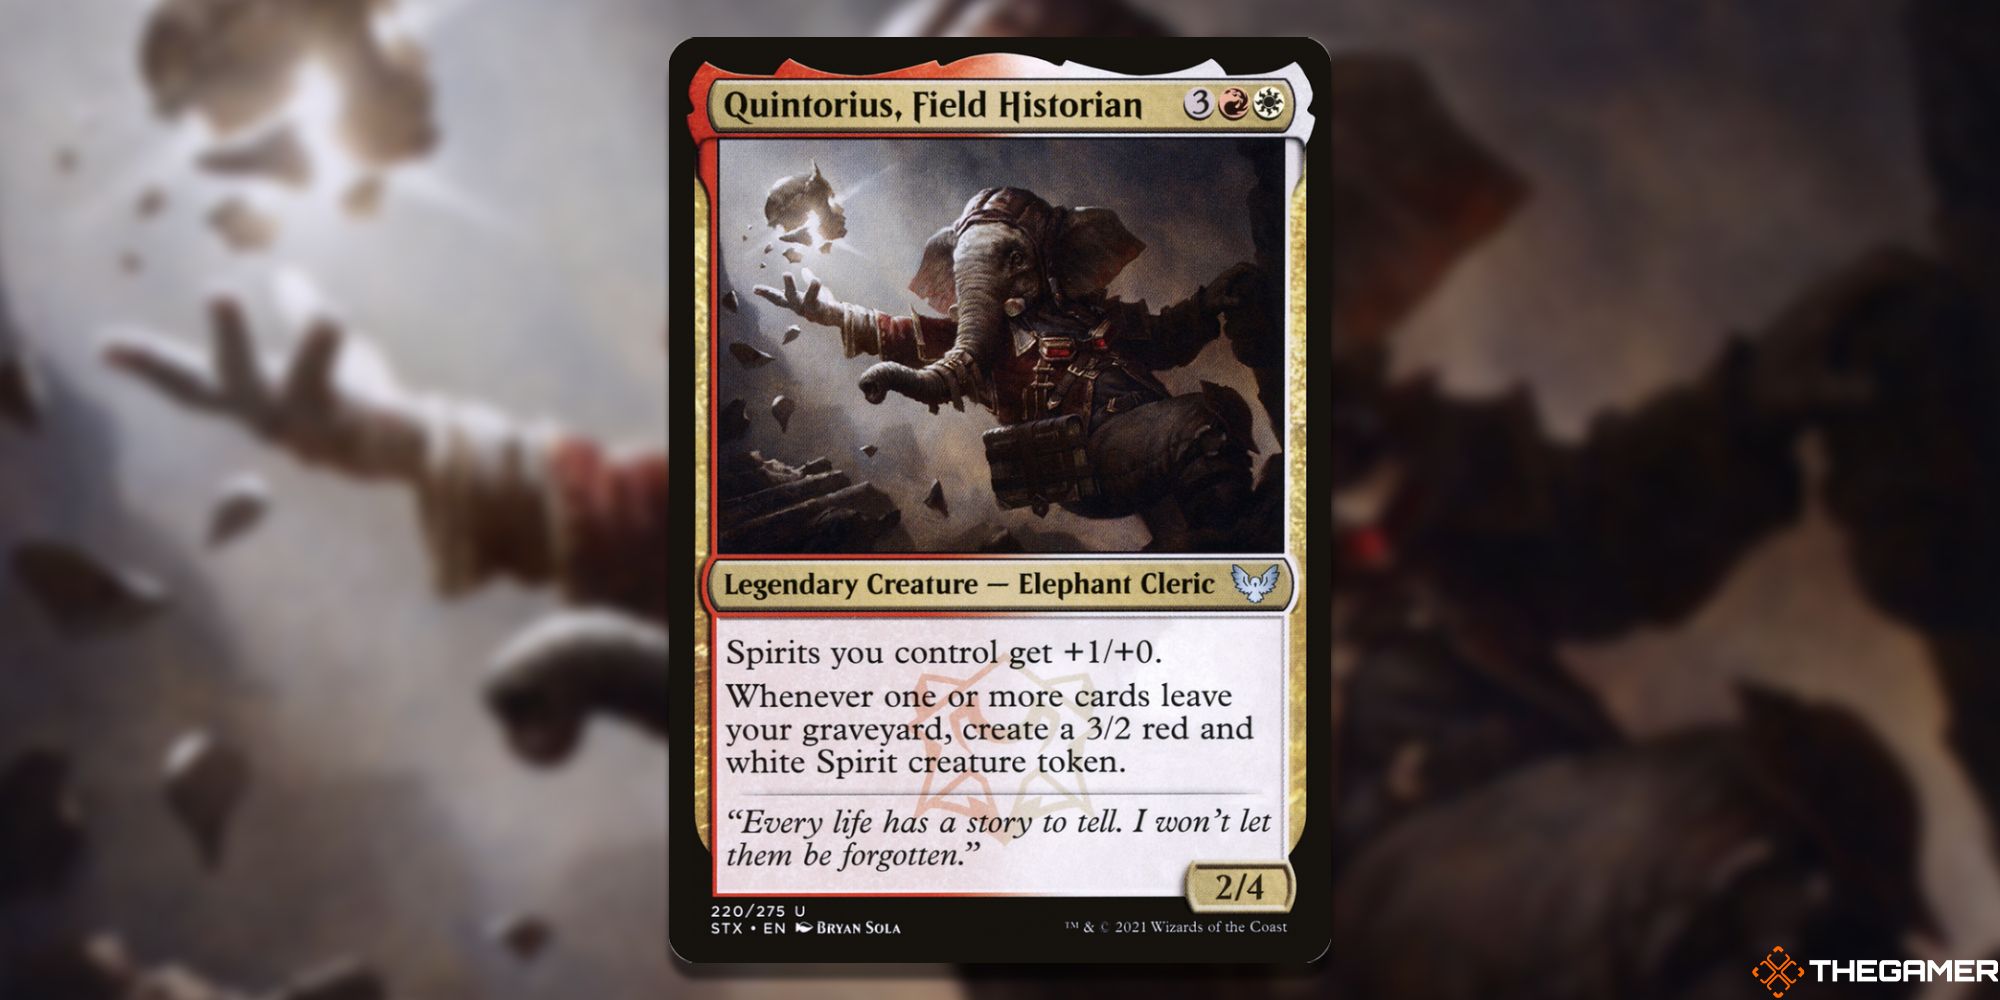 Image of the Quintorius, Field Historian card in Magic: The Gathering, with art by Bryan Sola